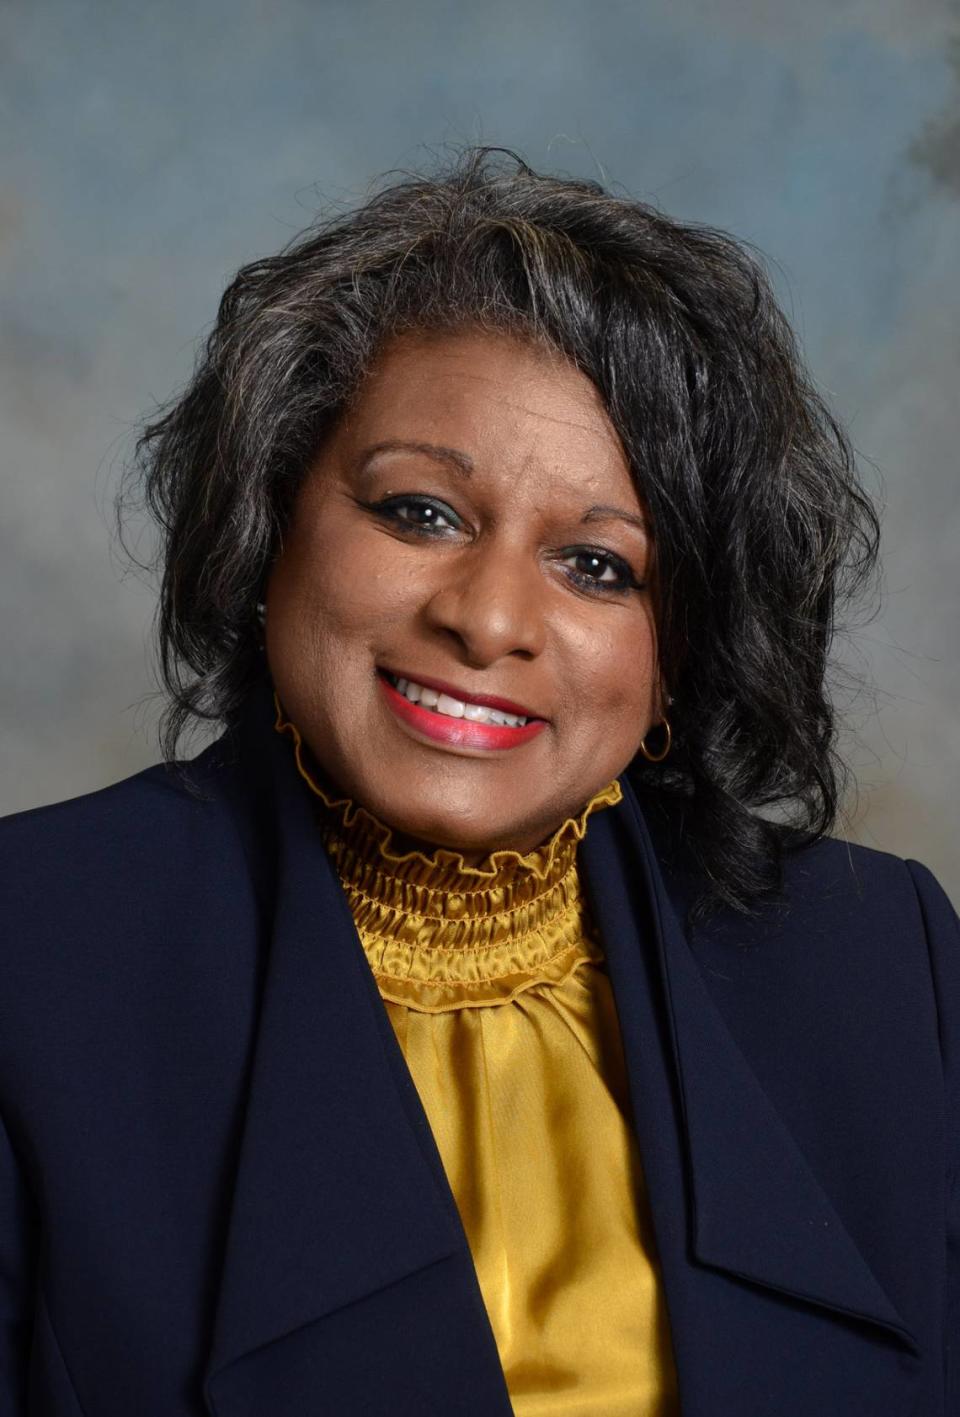 Sundra Woodford, who currently serves on the Bibb County School Board of Education for District 5, is running for reelection. 